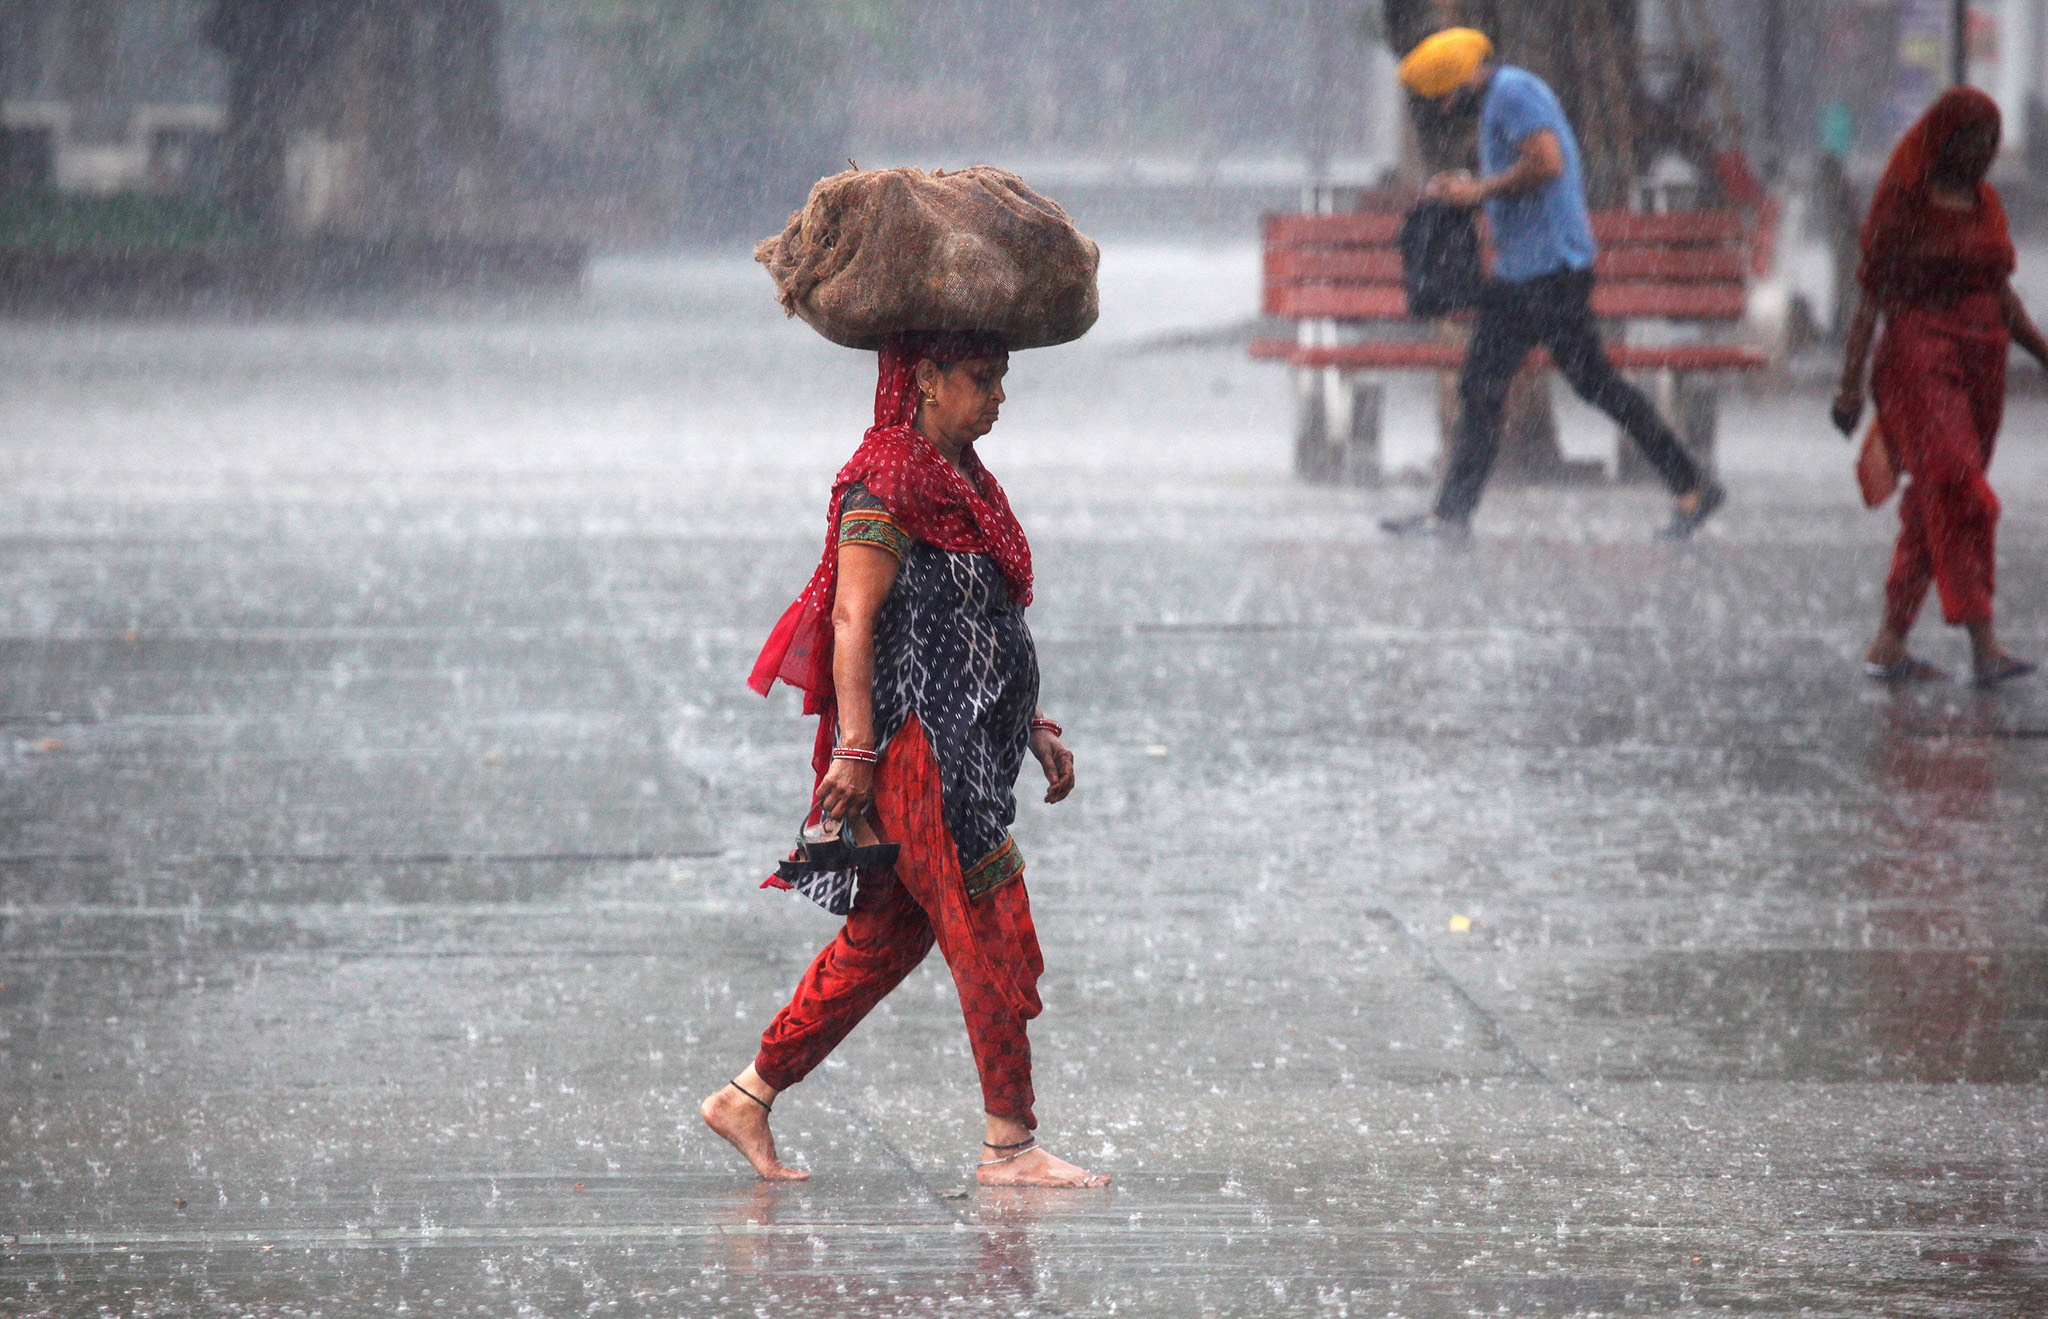 A woman carries a sack outside a market during heavy rains in Chandigarh, India,